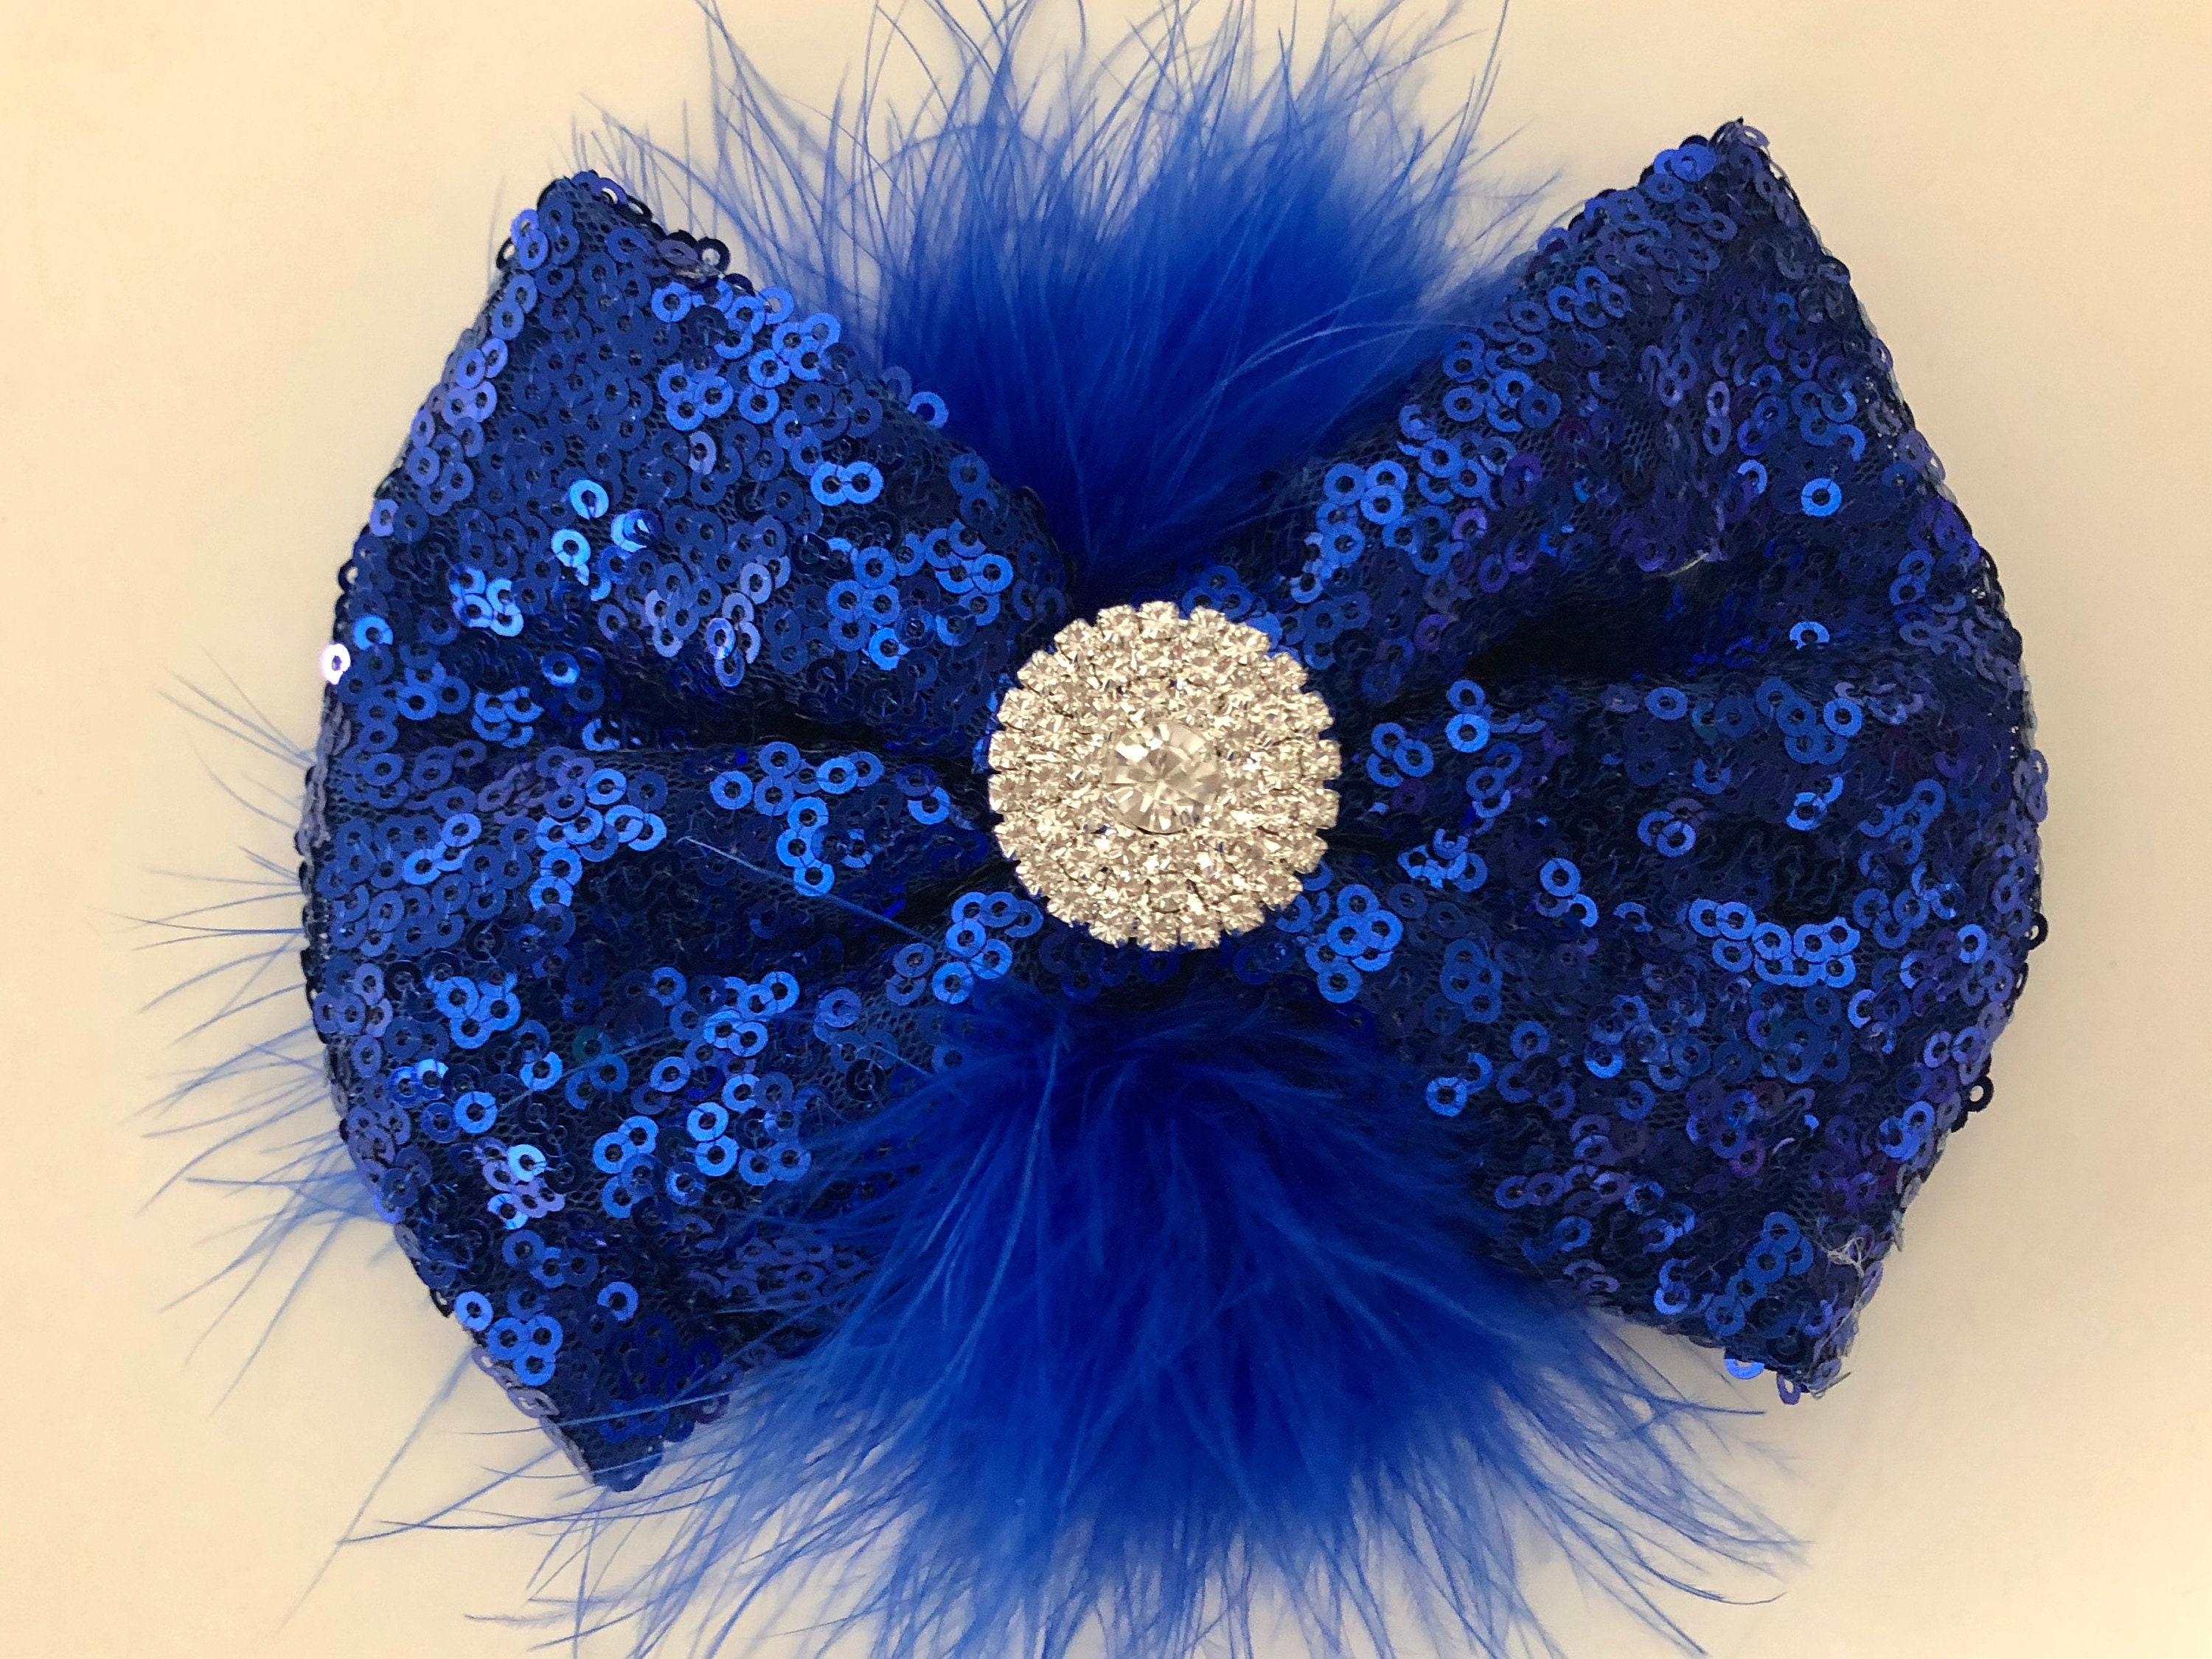 7. Big Royal Blue Hair Bow for Dance Performances - wide 8